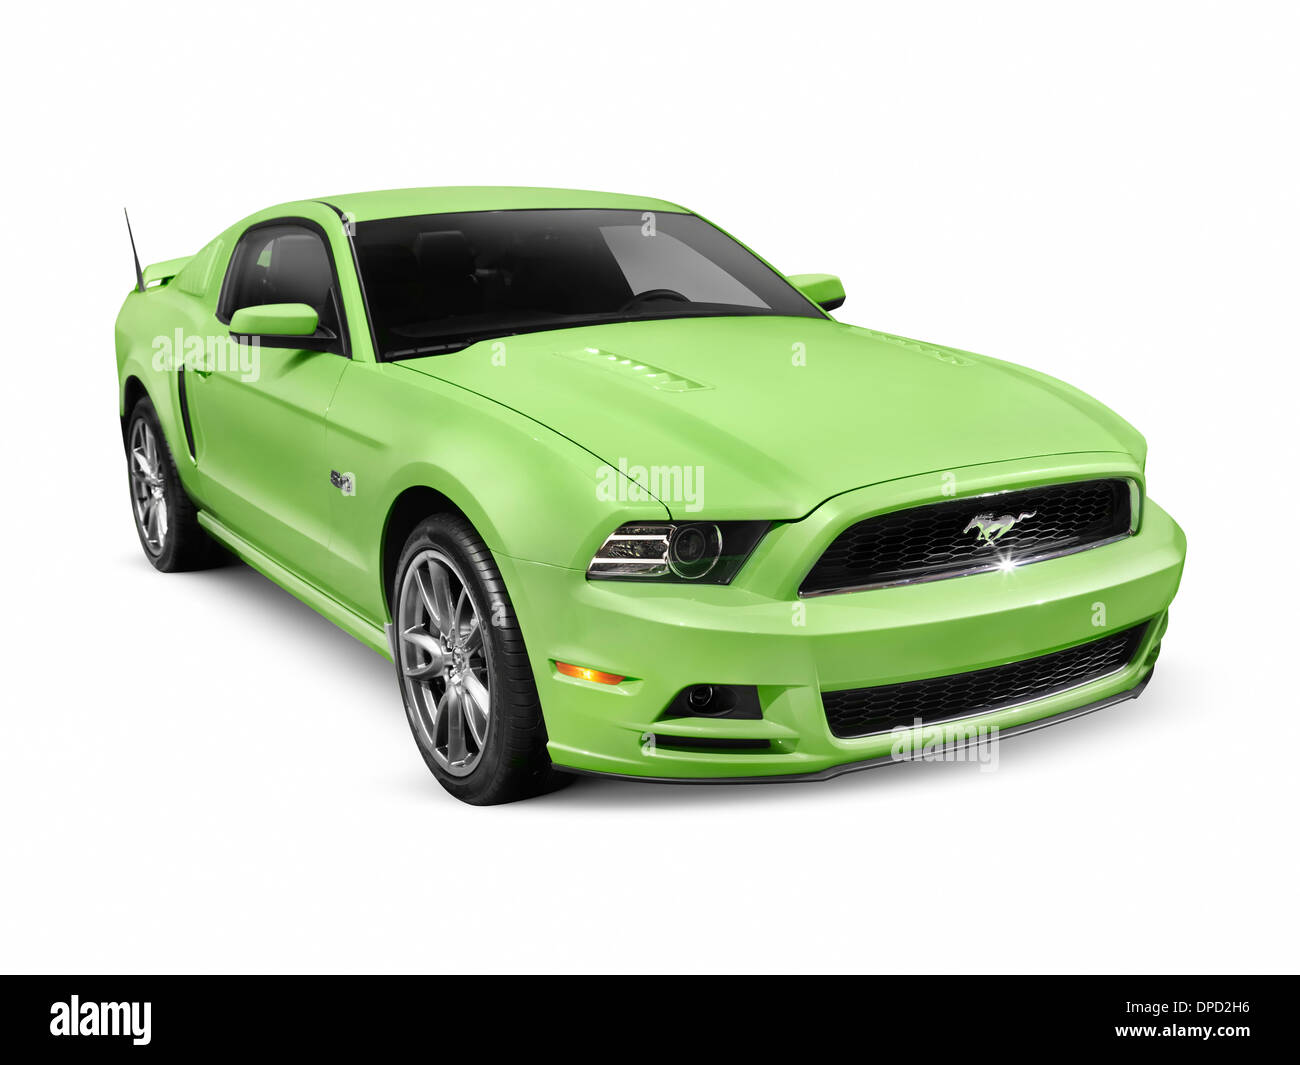 Ford Mustang GT 5.0 (2011) - характеристики